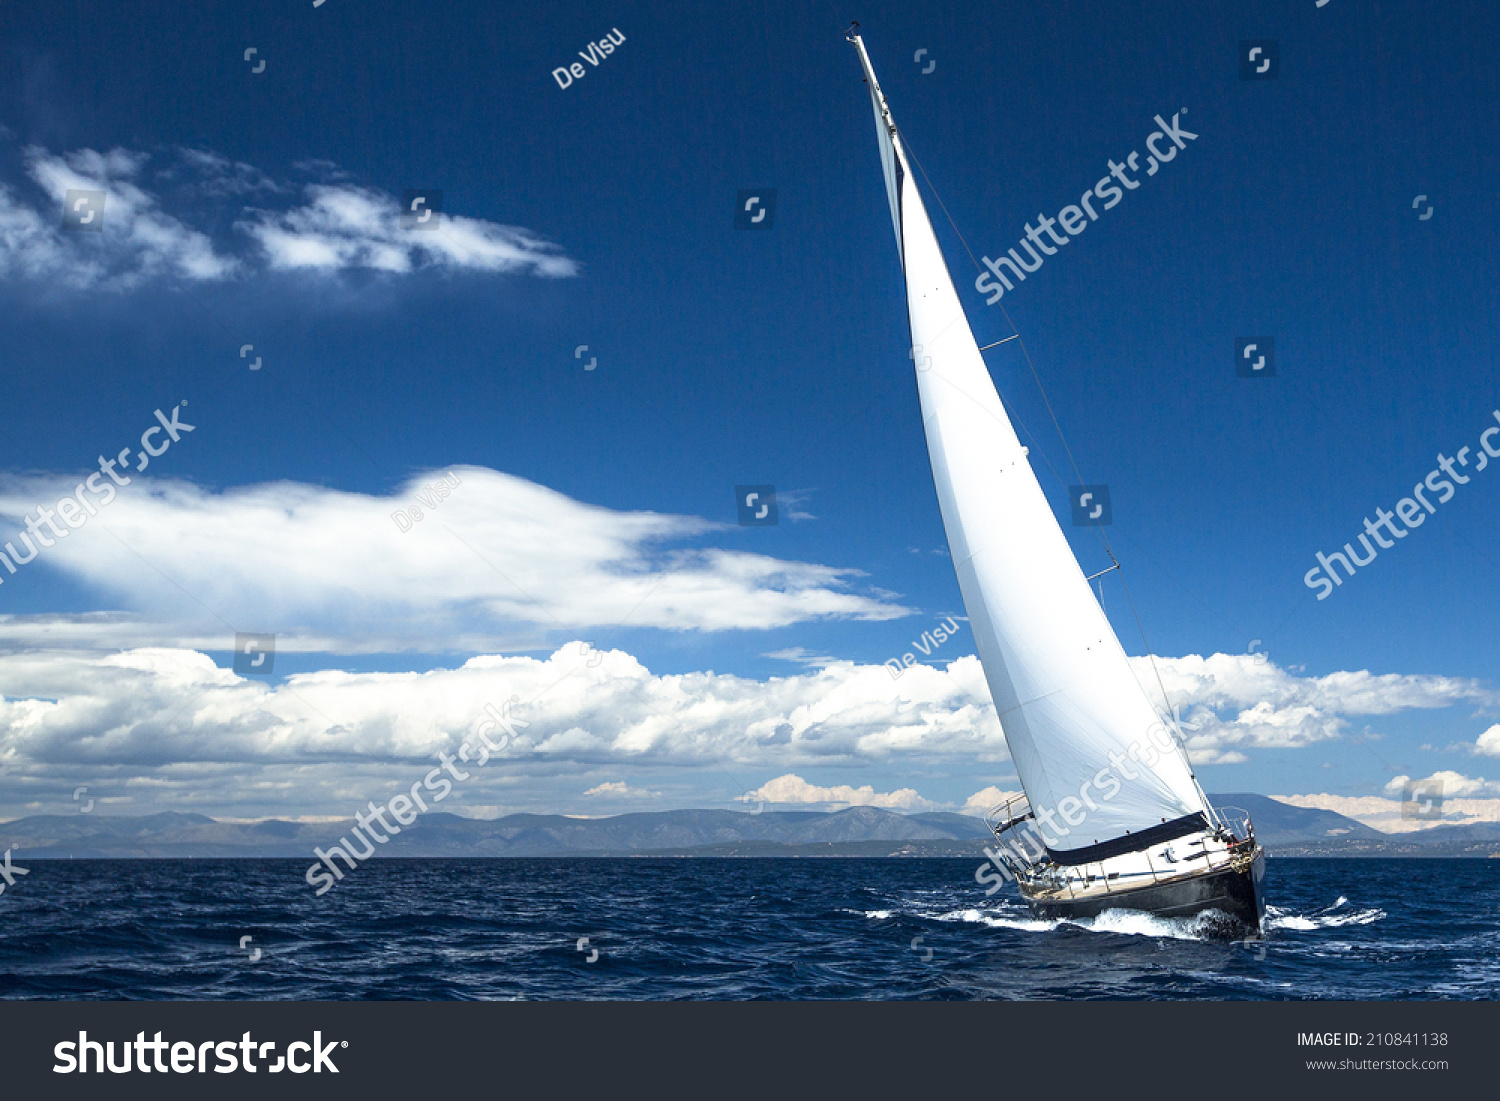 Luxury yachts. Boat in sailing regatta (with space for text) #210841138